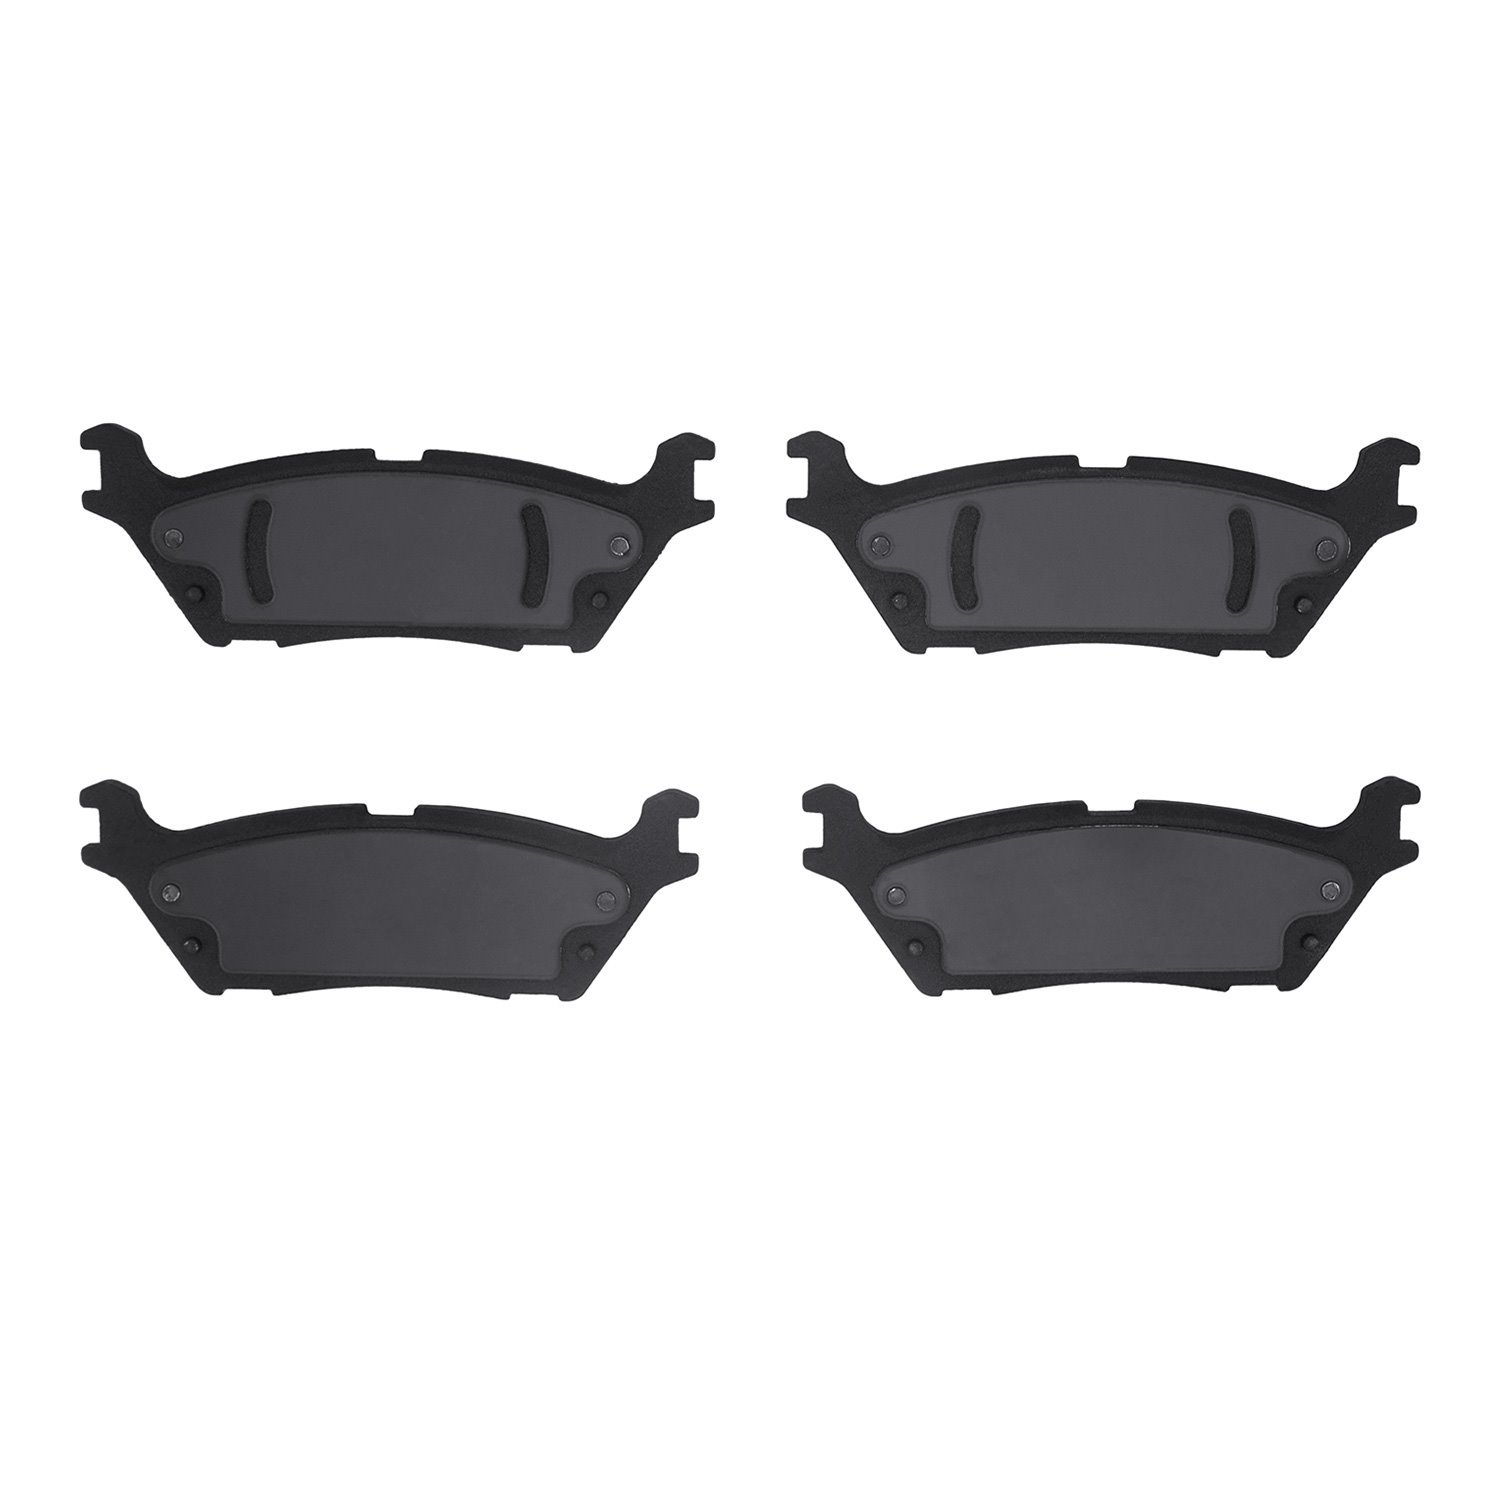 1551-2383-00 5000 Advanced Ceramic Brake Pads, Fits Select Ford/Lincoln/Mercury/Mazda, Position: Rear